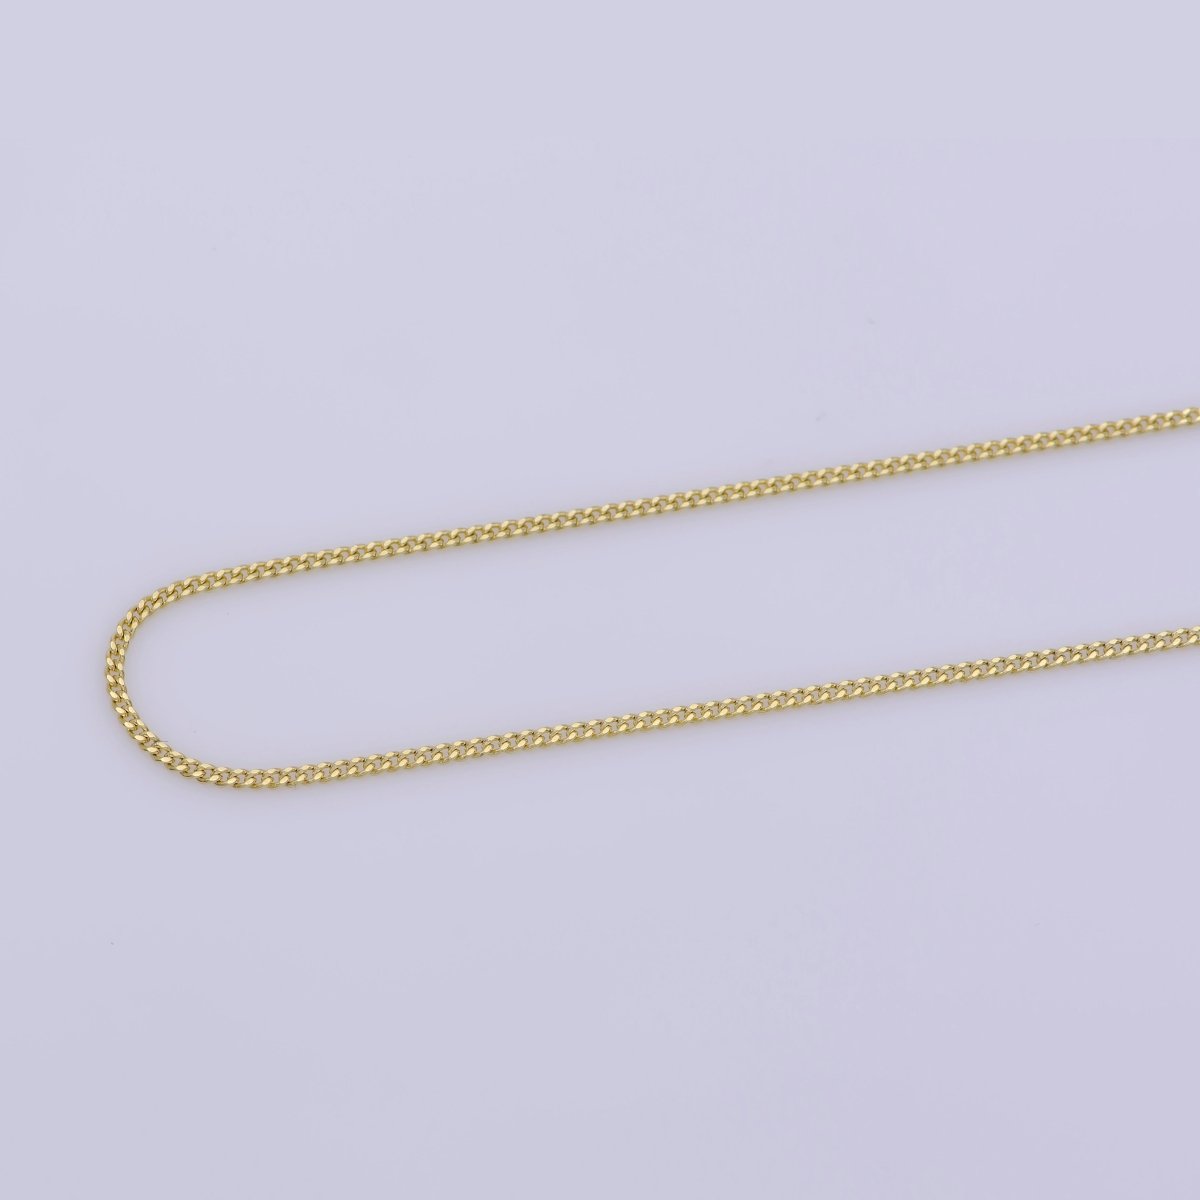 23.5" Curb Chain Necklace, 14K Gold Plated Finished Chain For Jewelry Making, Dainty 1.1mm Curb Necklace w/Spring Ring | CN-362 Clearance Pricing - DLUXCA